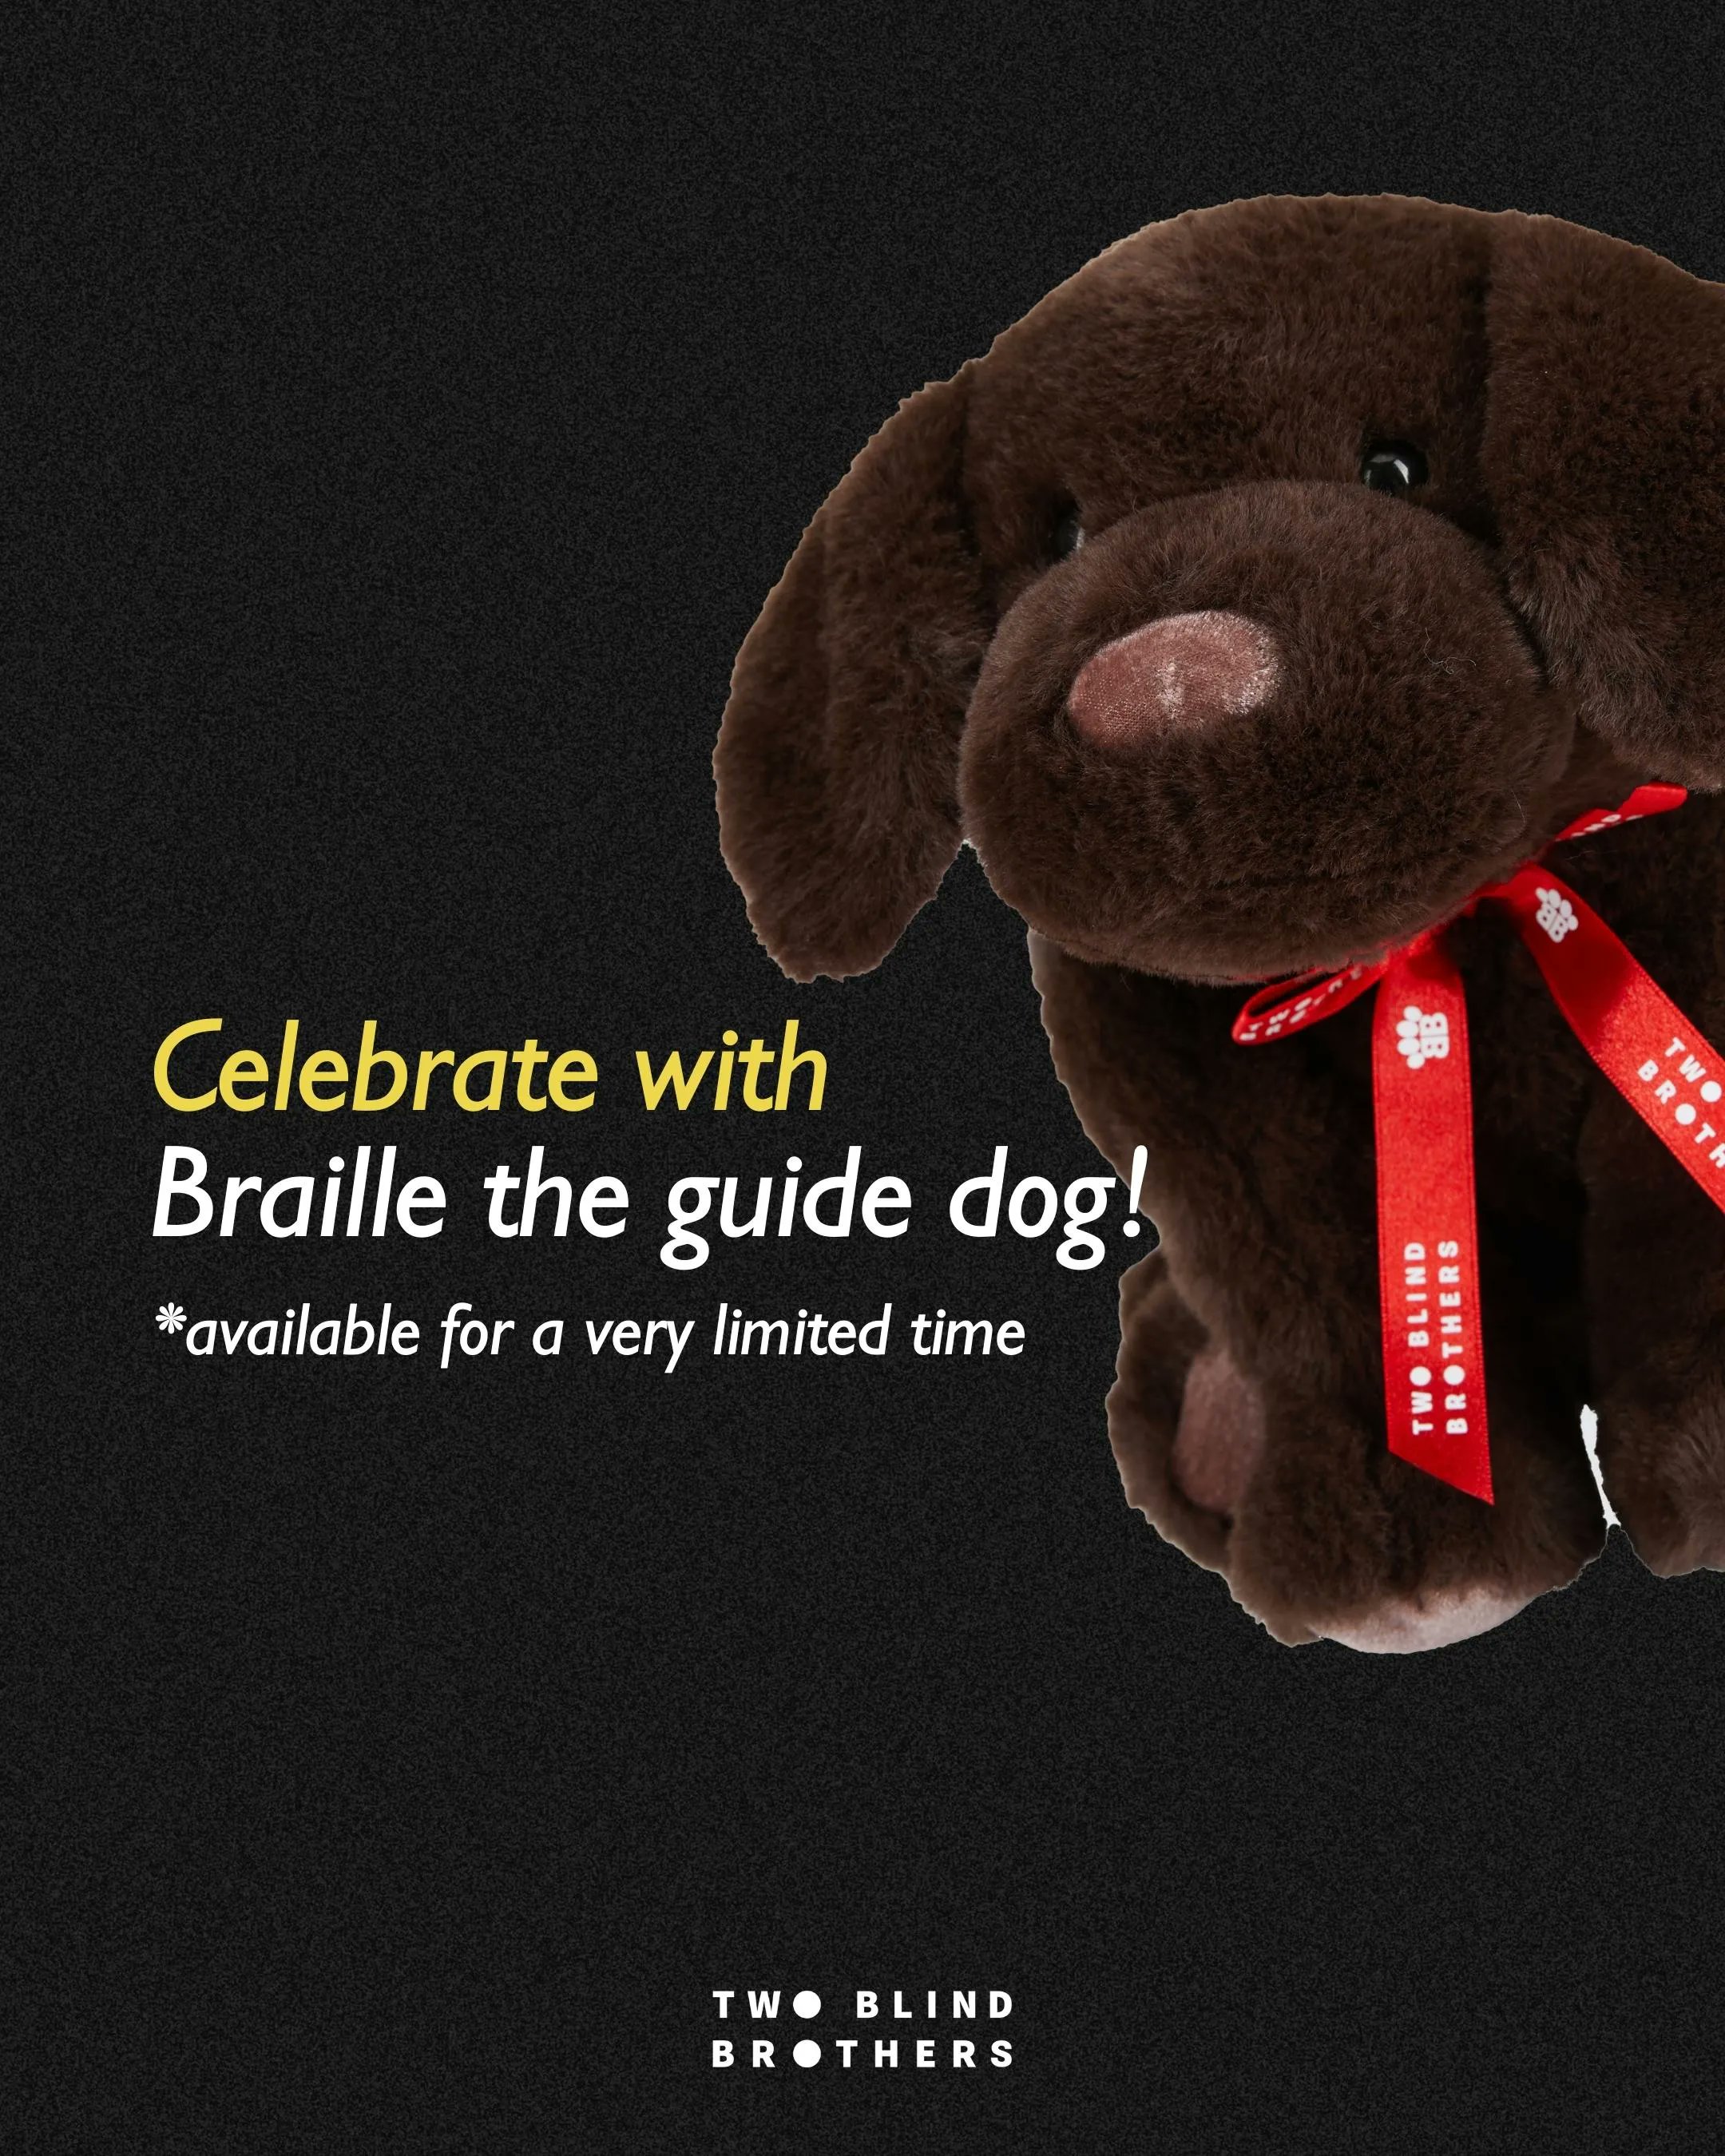 Celebrate with Braille the guide dog! *Available for a limited time